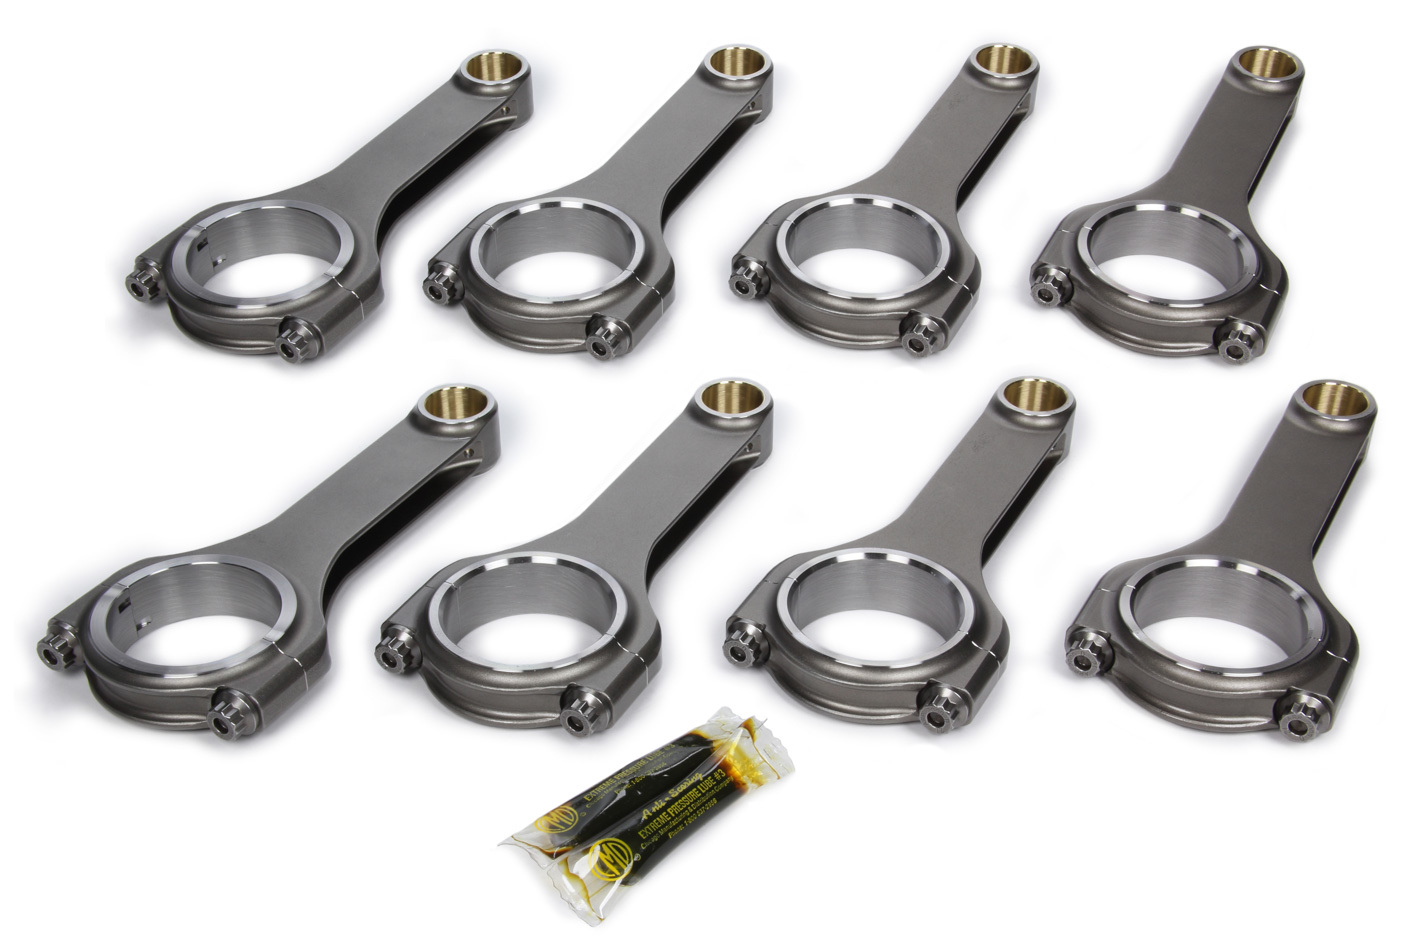 Dyers Rods 6000NHSBCLJ7200AD Connecting Rod, H Beam, 6.000 in Long, Bushed, 7/16 in Cap Screws, ARP2000, Small Block Chevy, Set of 8